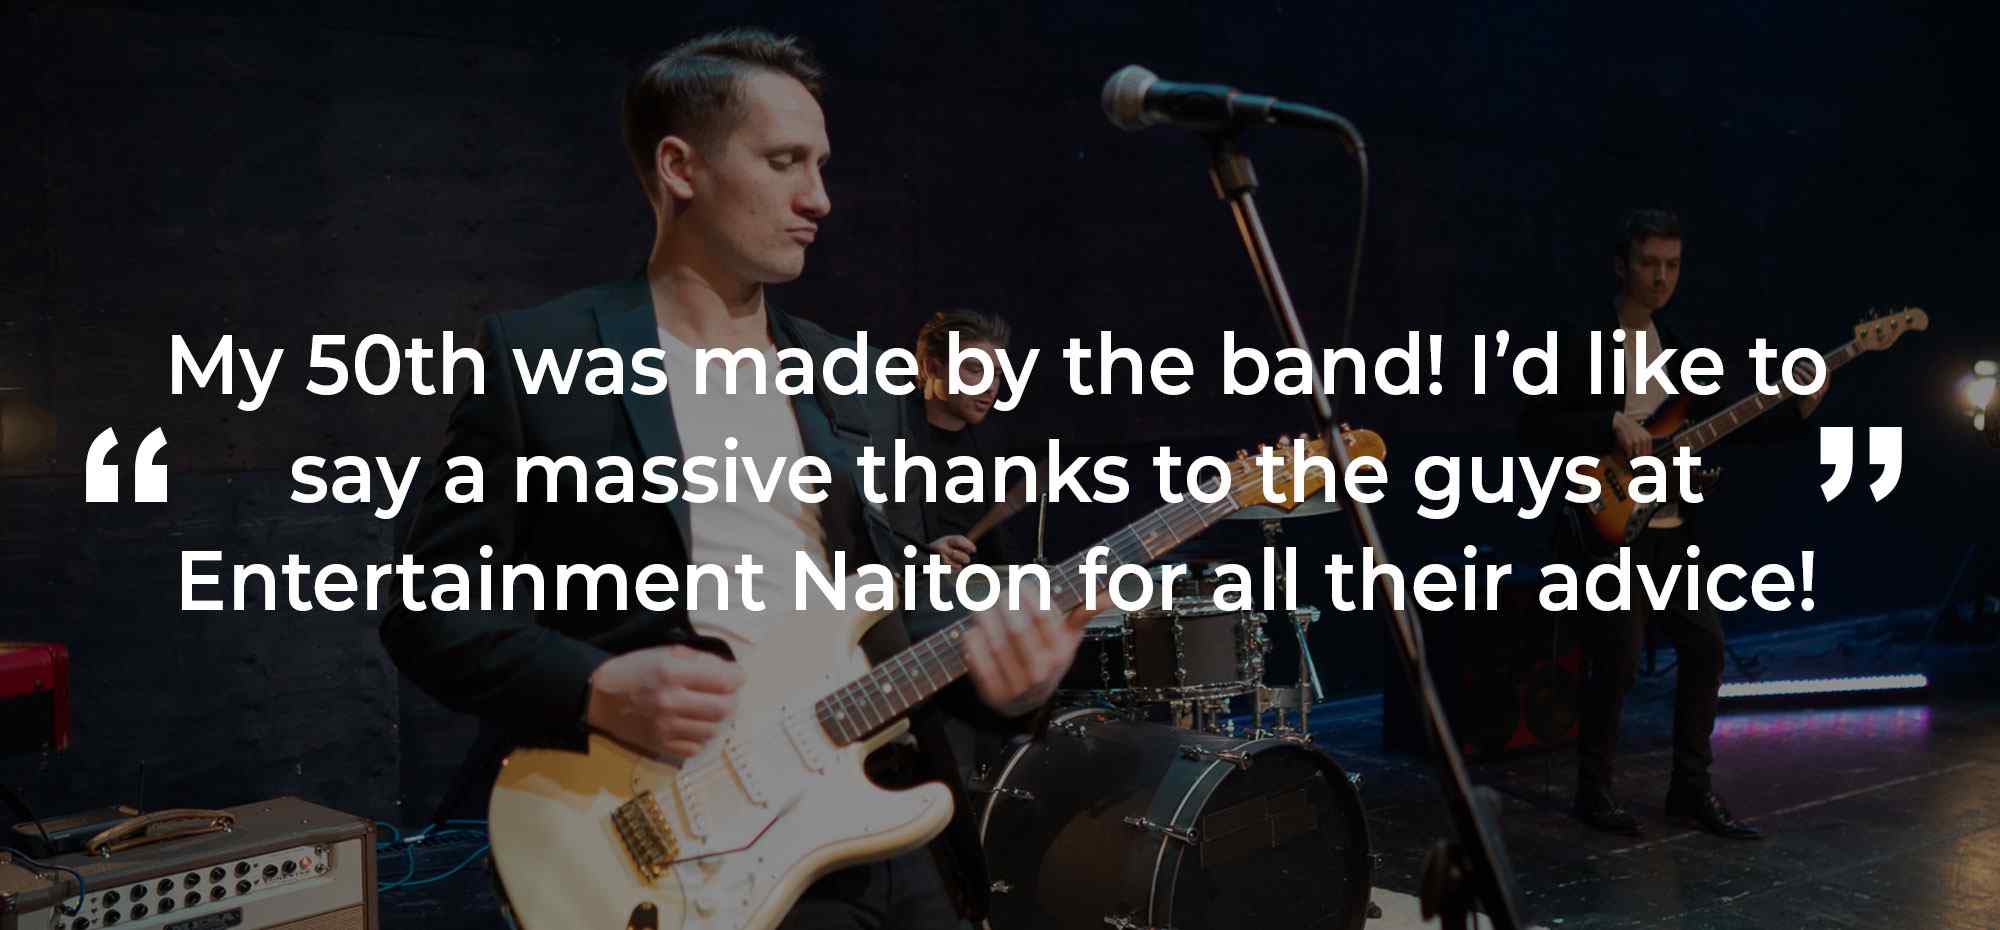 Client Review of a Party Band Middlesex